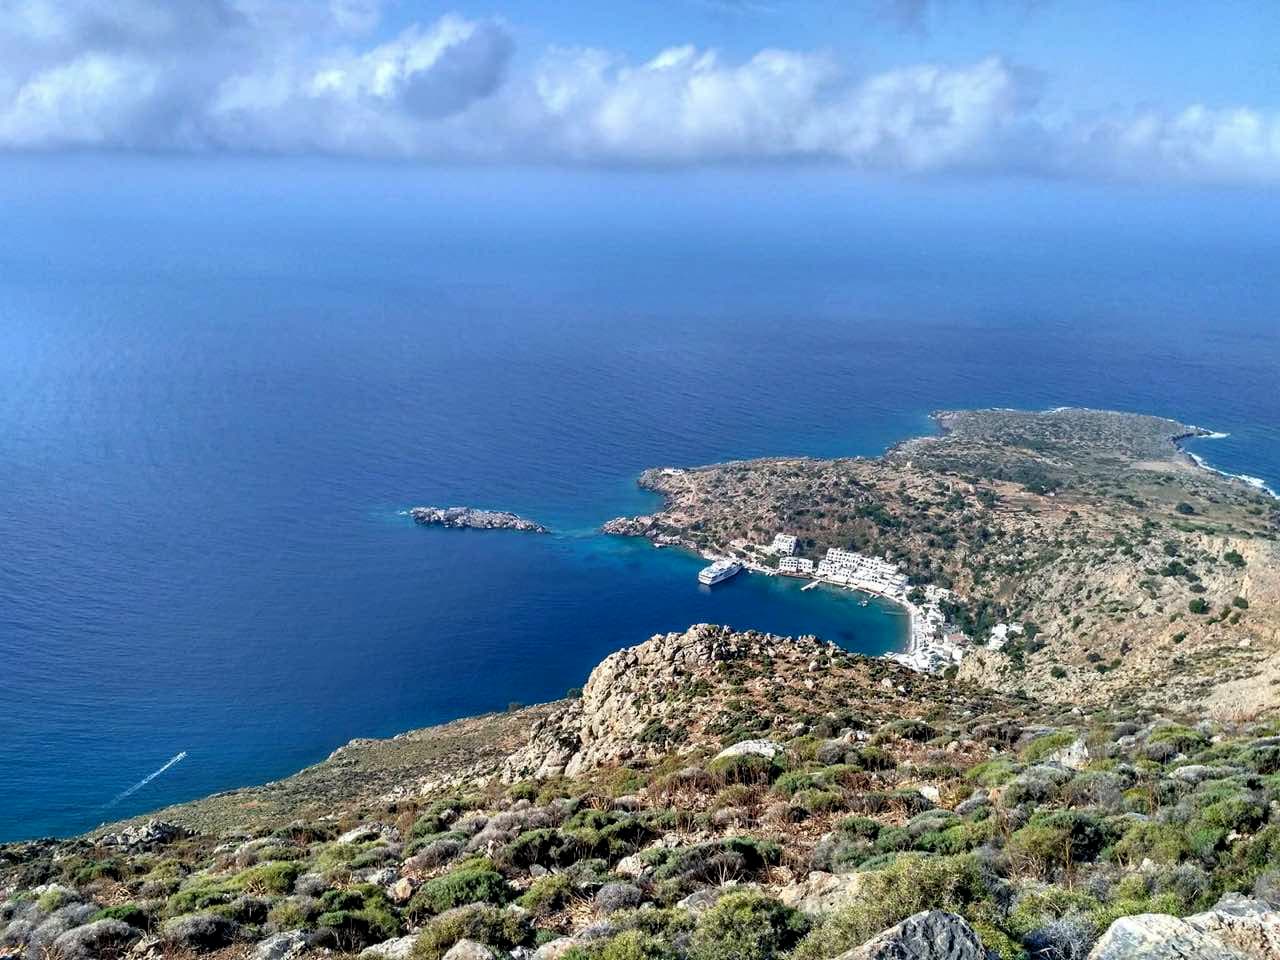 The Far Out South Exploring Amazing South Chania, activities south chania crete, imbros gorge hiking, loutro village, sfakia village, best activity south crete, activities chania crete, things to do chania crete, visit south chania crete activity